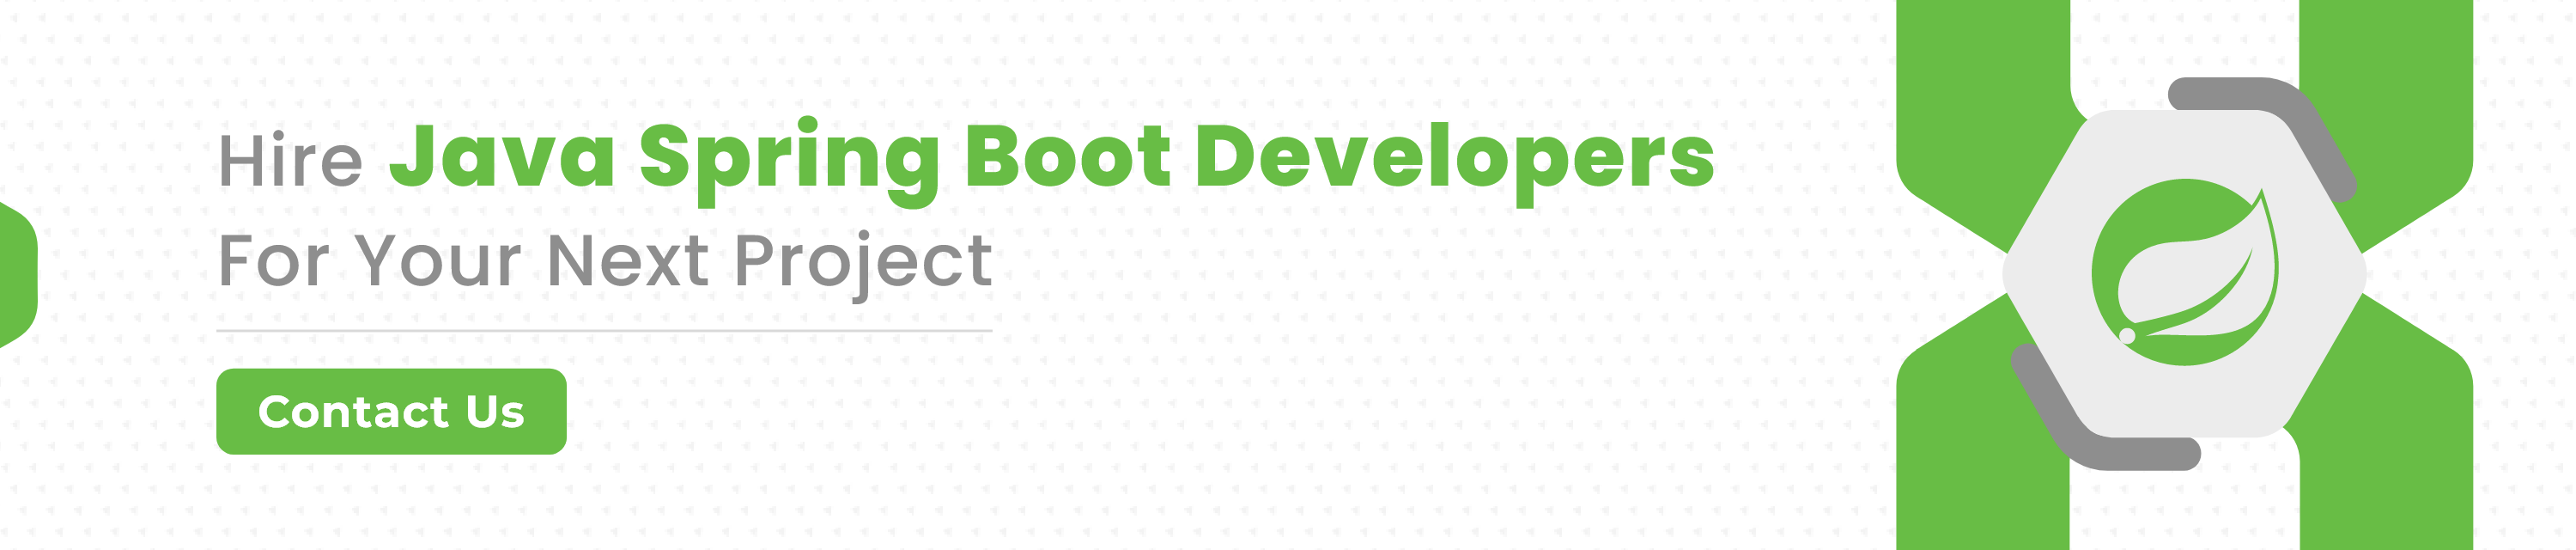 Hire Java Spring Boot Developers